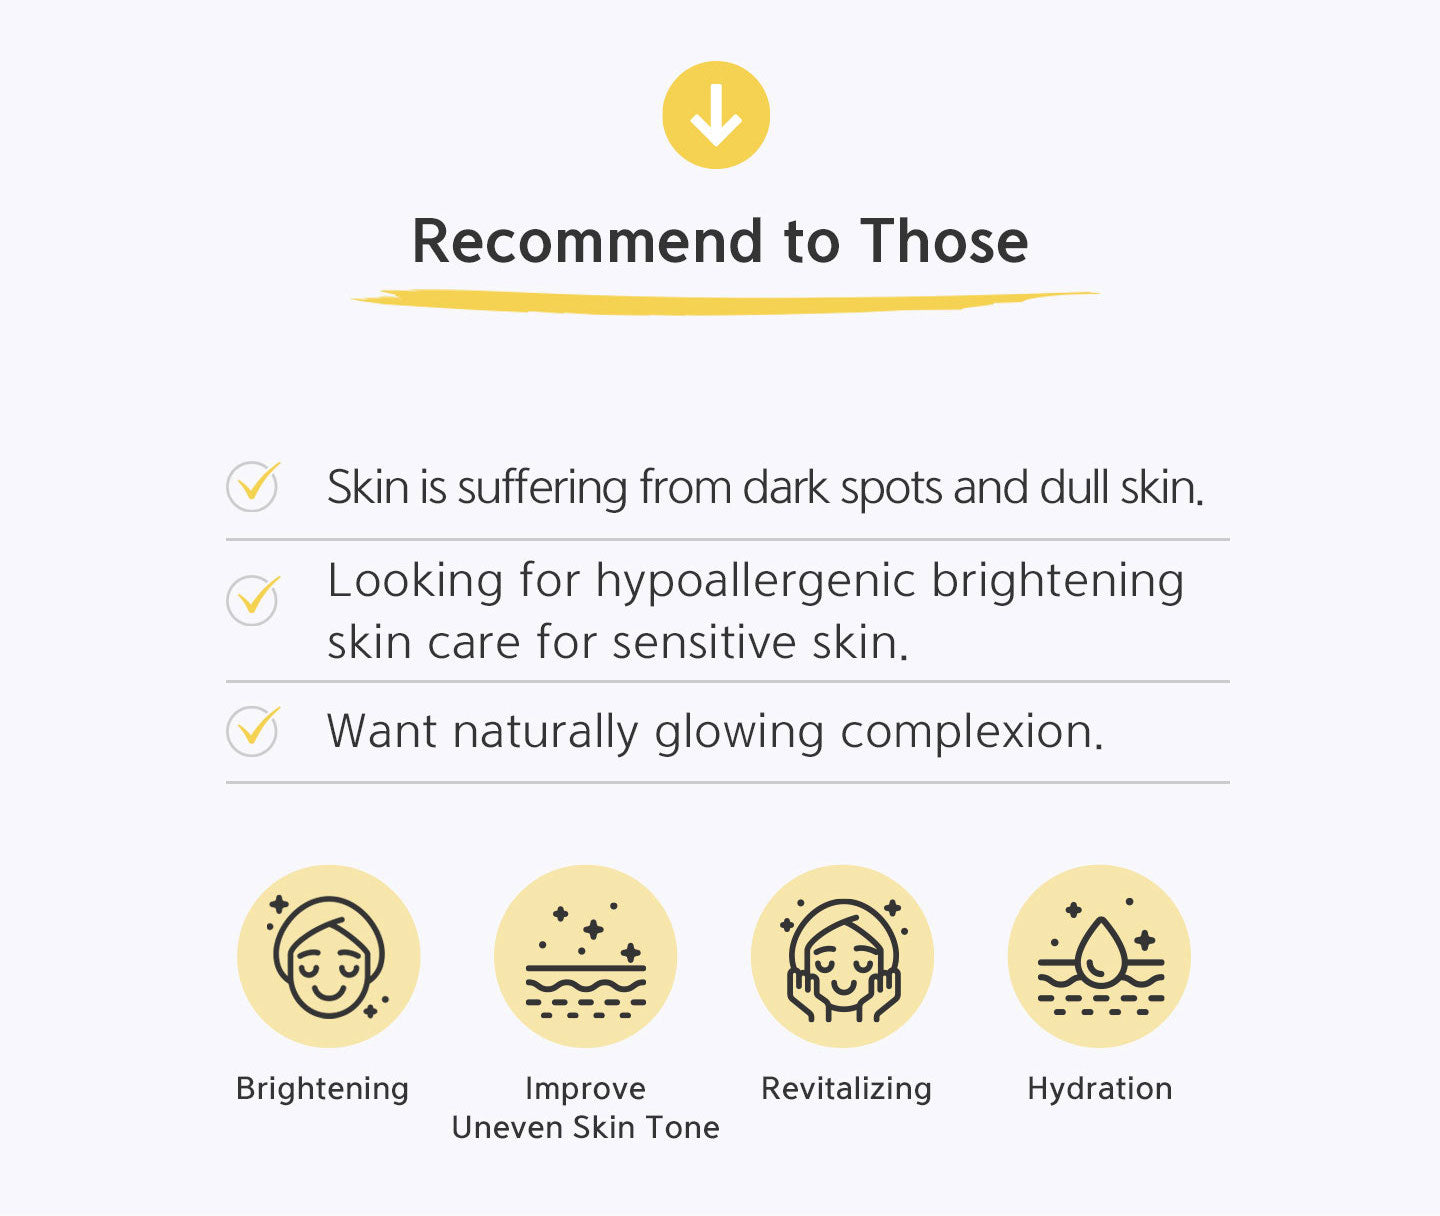 Recommend to those skin is suffering from dark spots and dull skin, looking for hypoallergenic brightening skin care for sensitive skin, want naturally glowing complexion. Brightening, improve uneven skin tone, revitalizing and hydration. 